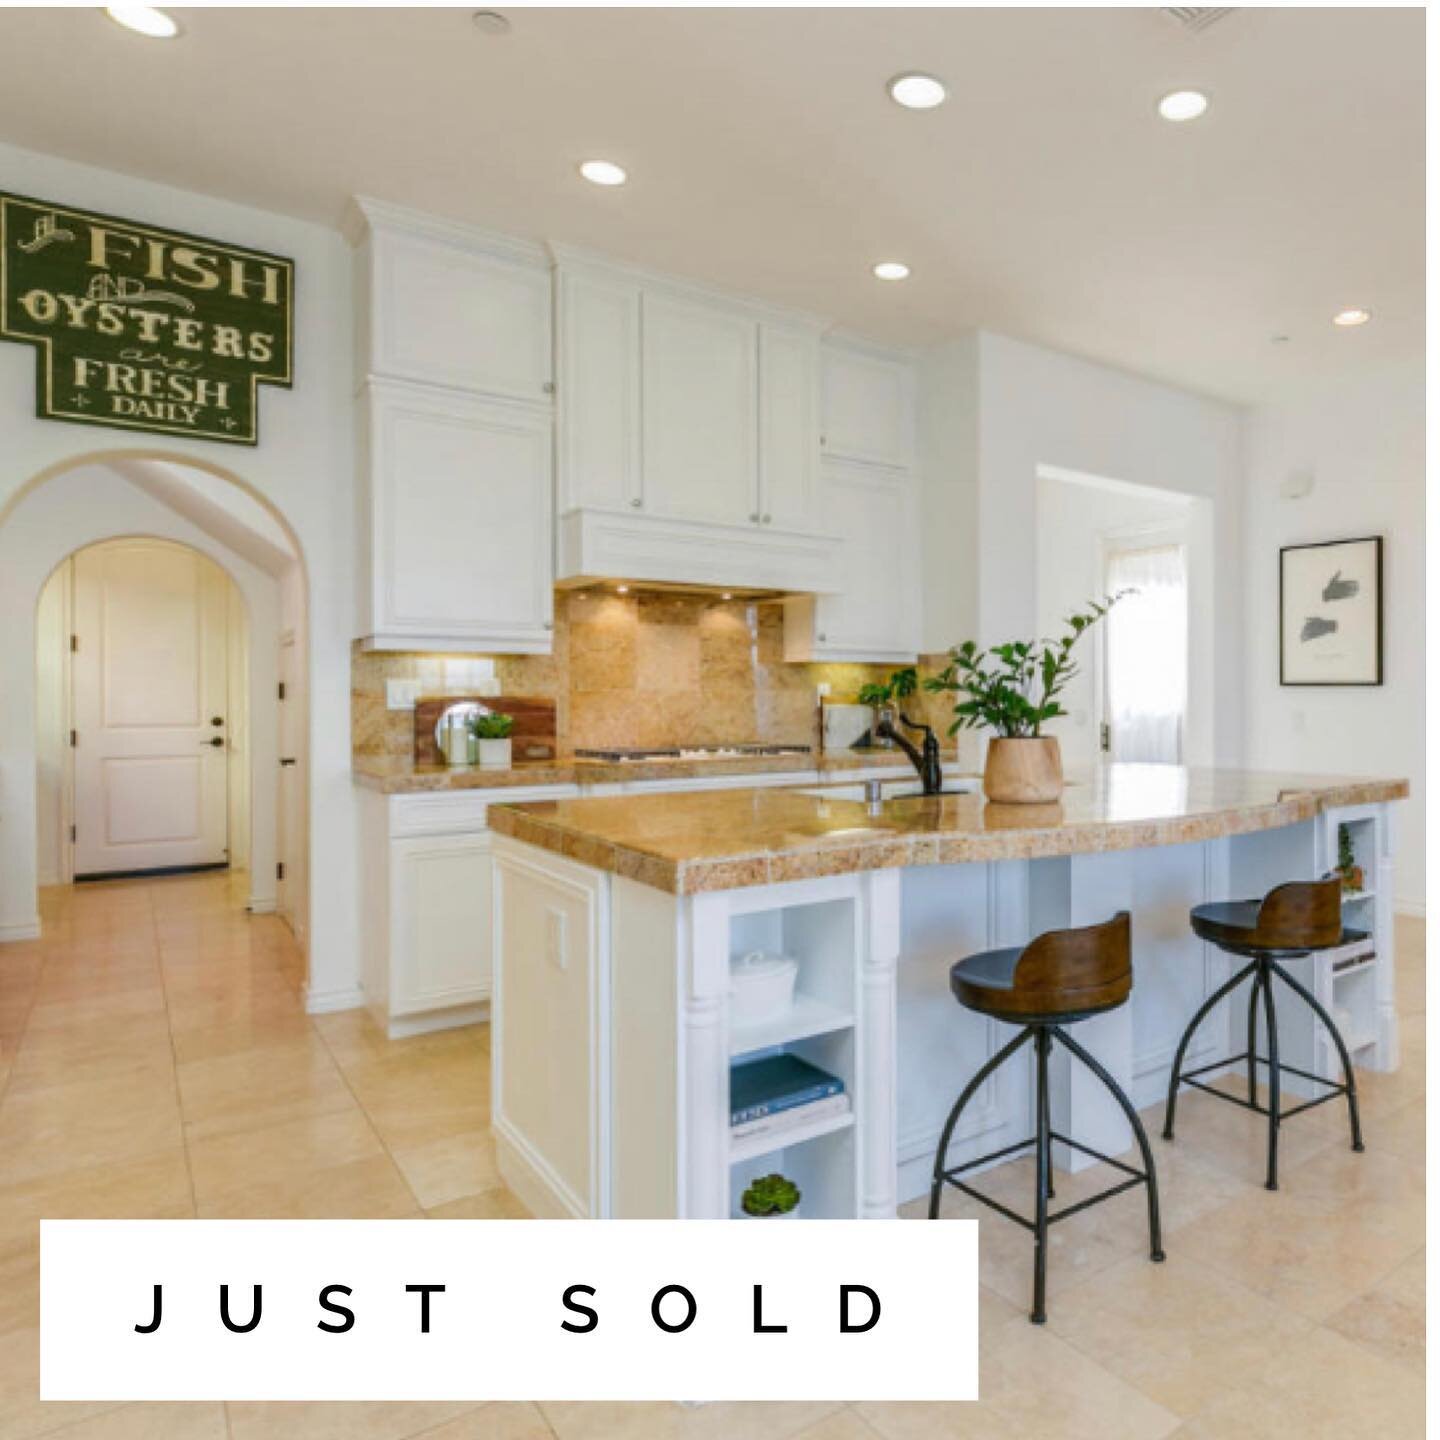 Congratulations to my clients and the darling family who get to call Estuary home! Thank you for the dreamiest escrow @laura.darrah.realtor ! #dreamhome #beachhouse #harborhouse #shanoahcurranhomes #livsothebysrealtyventura